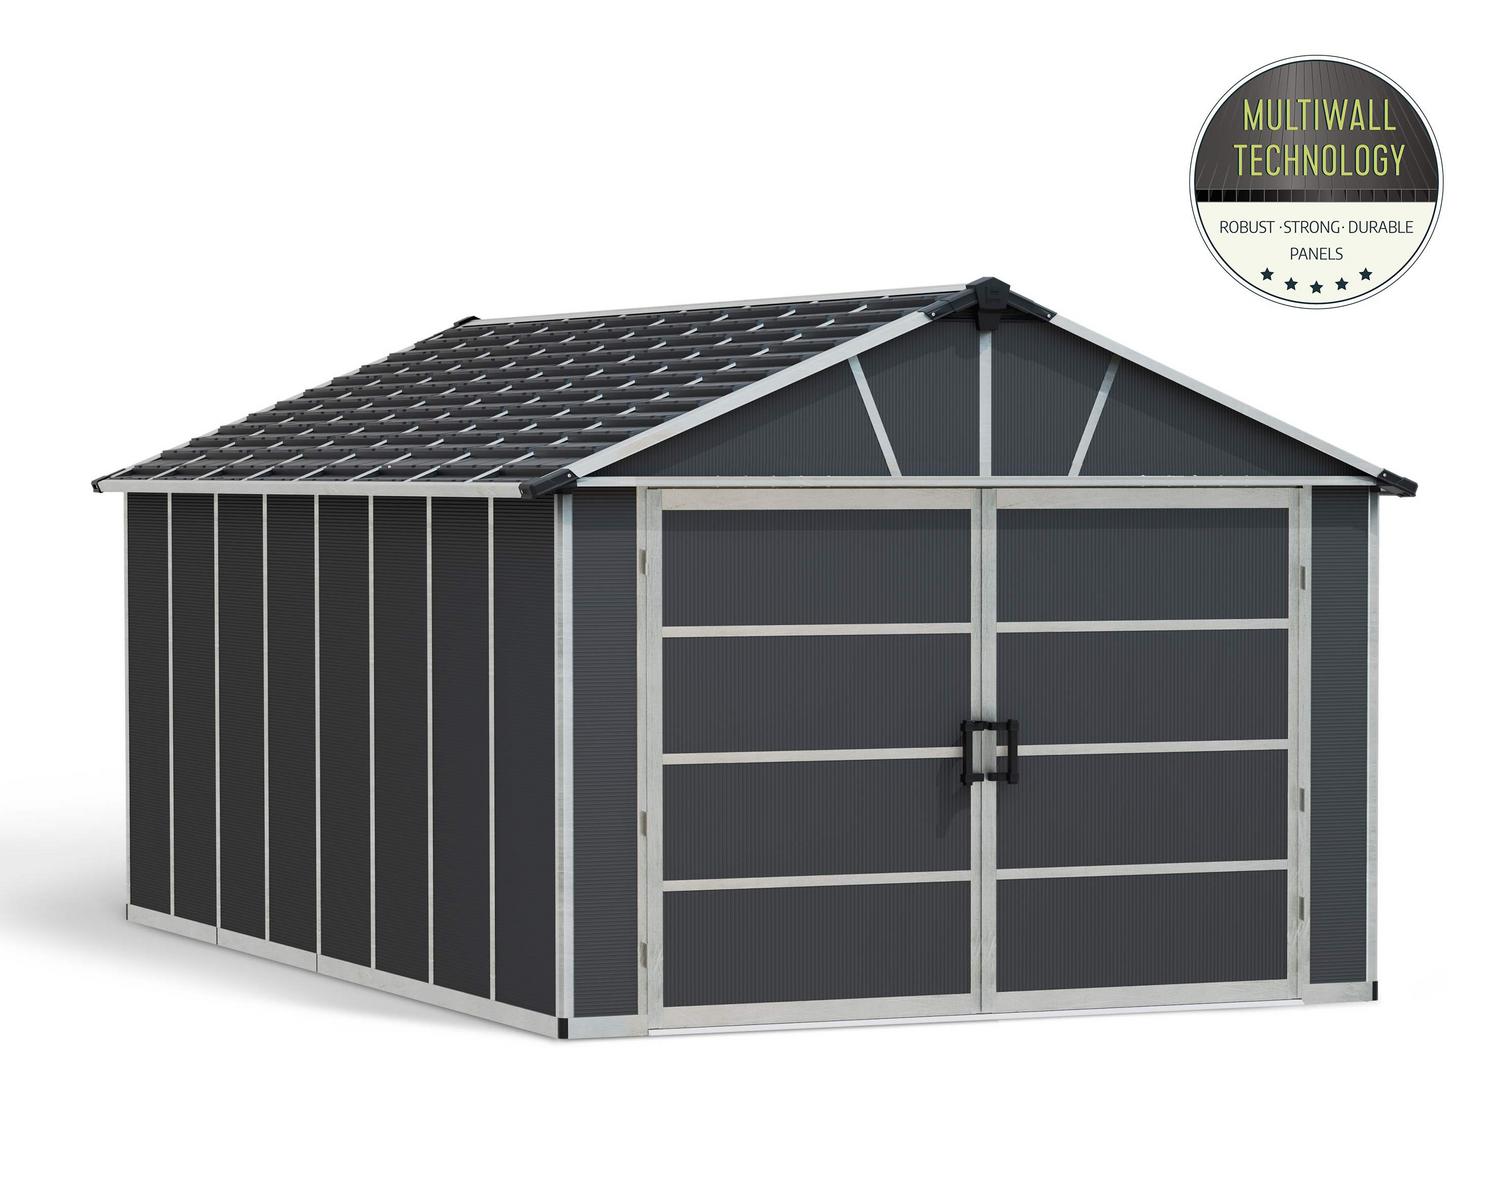 Plastic Garage Shed with Double Door Yukon 11 ft. x 17.2 ft. Dark Grey Polycarbonate Multiwall and Aluminum Frame